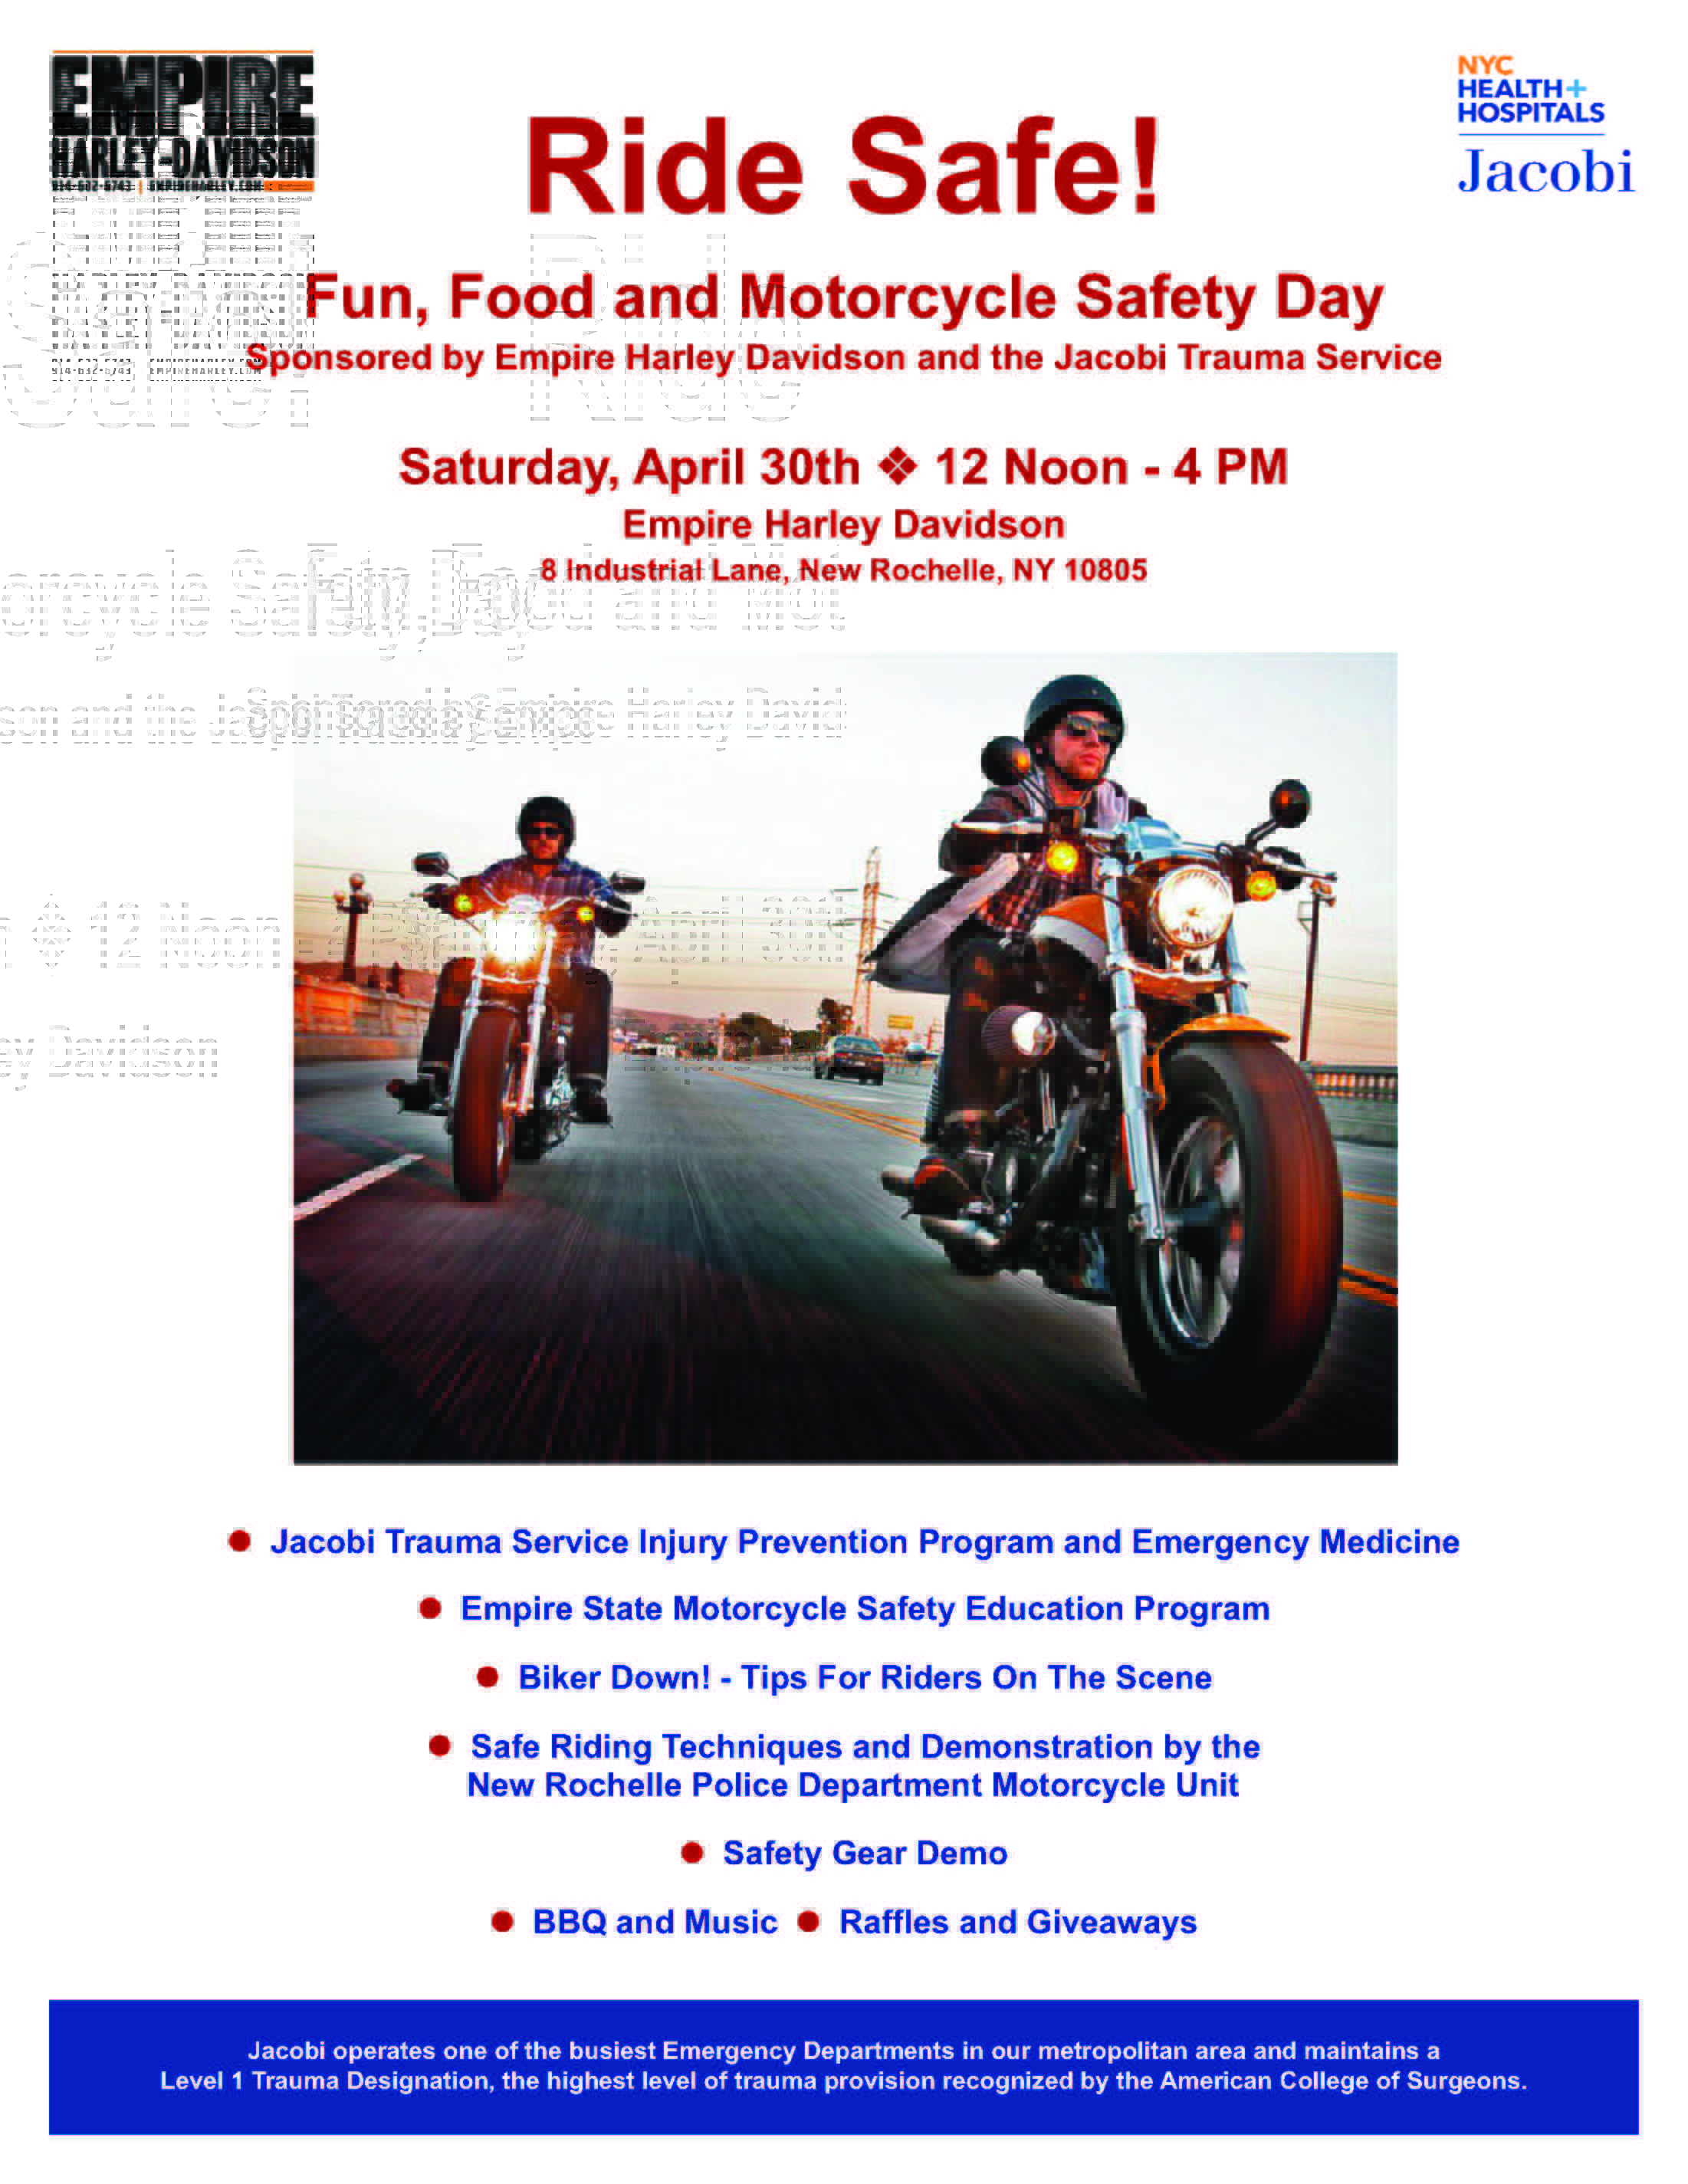 Ride Safe! Motorcycle Safety Day